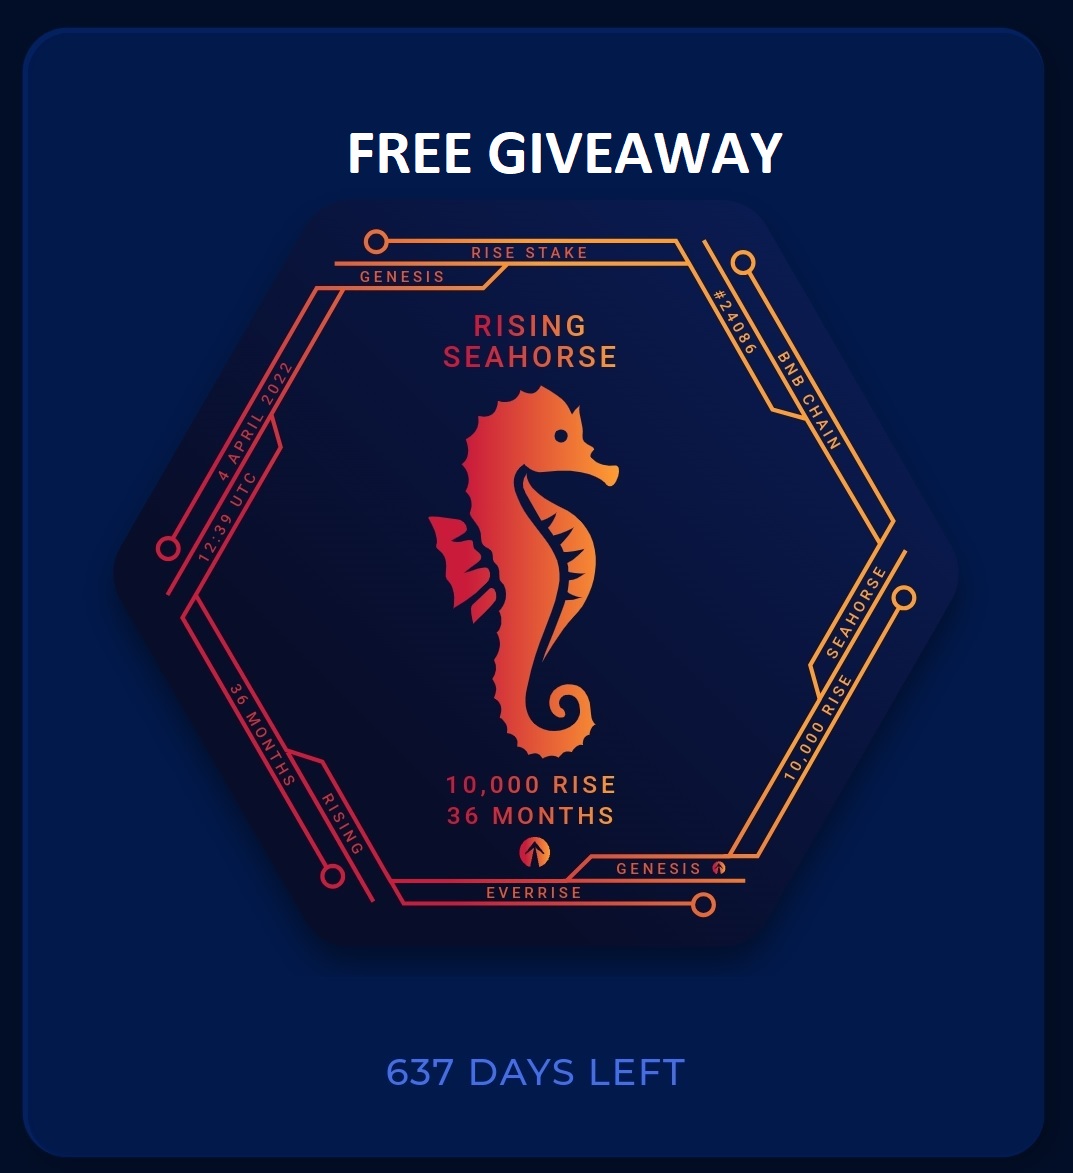 FREE #NFT #GIVEAWAY

It contains 10000 #RISE tokens
Keep it in your wallet to get more RISE tokens

To partecipate:
✅ Follow me
✅ Like and retweet
✅ Comment tagging 3 friends

Drawing winner in 7 days

#NFTGiveaway #NFTCommunity  #CryptoGiveaway #bsc @EverRise #btc #freecrypto